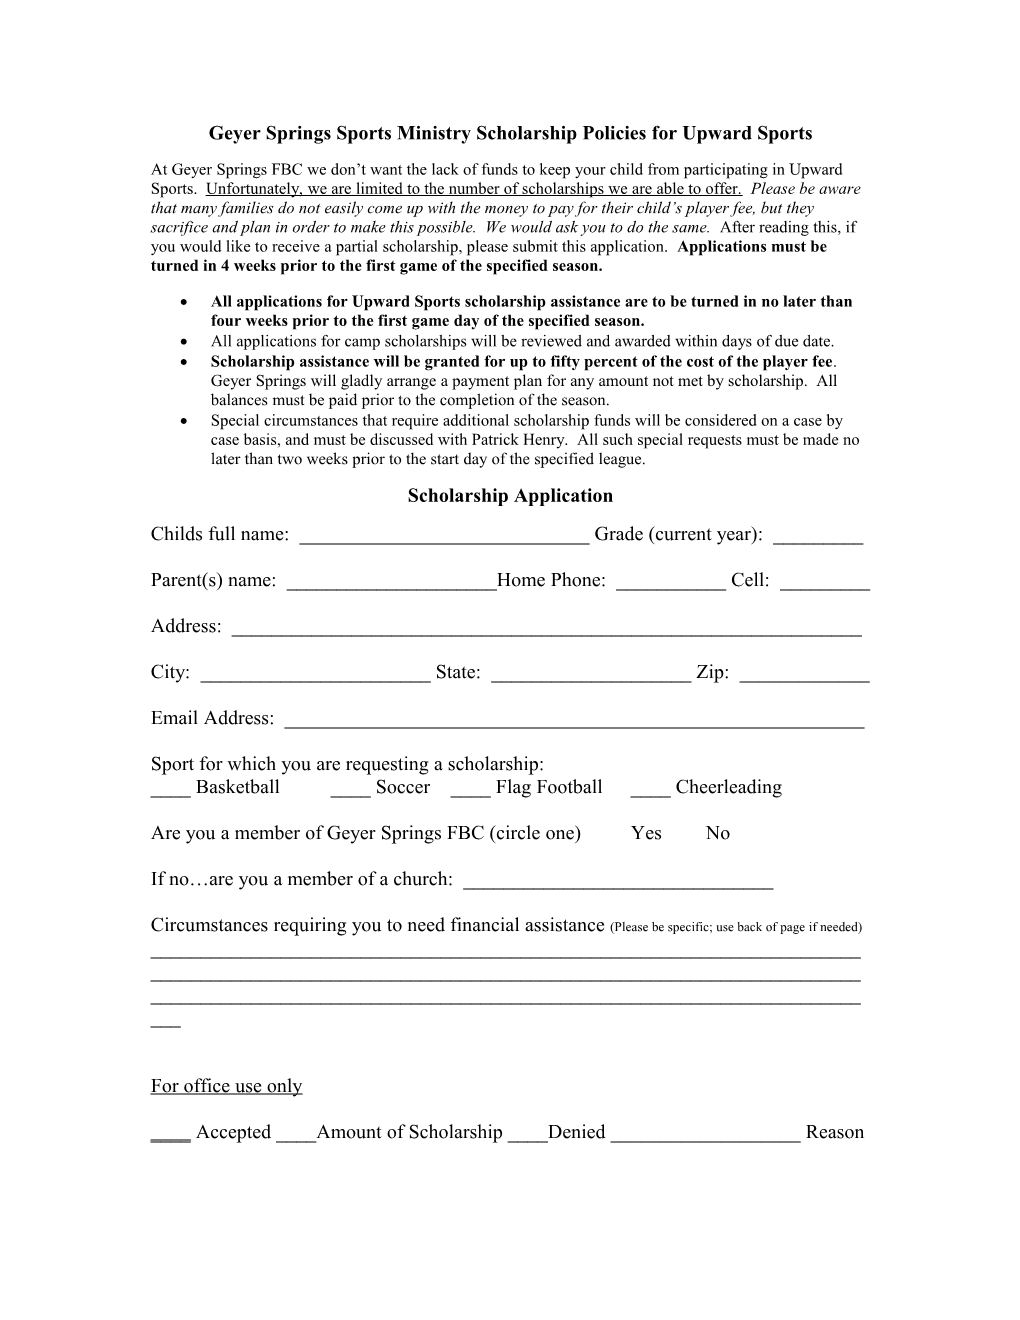 Geyer Springs Sports Ministry Scholarship Policies for Upward Sports